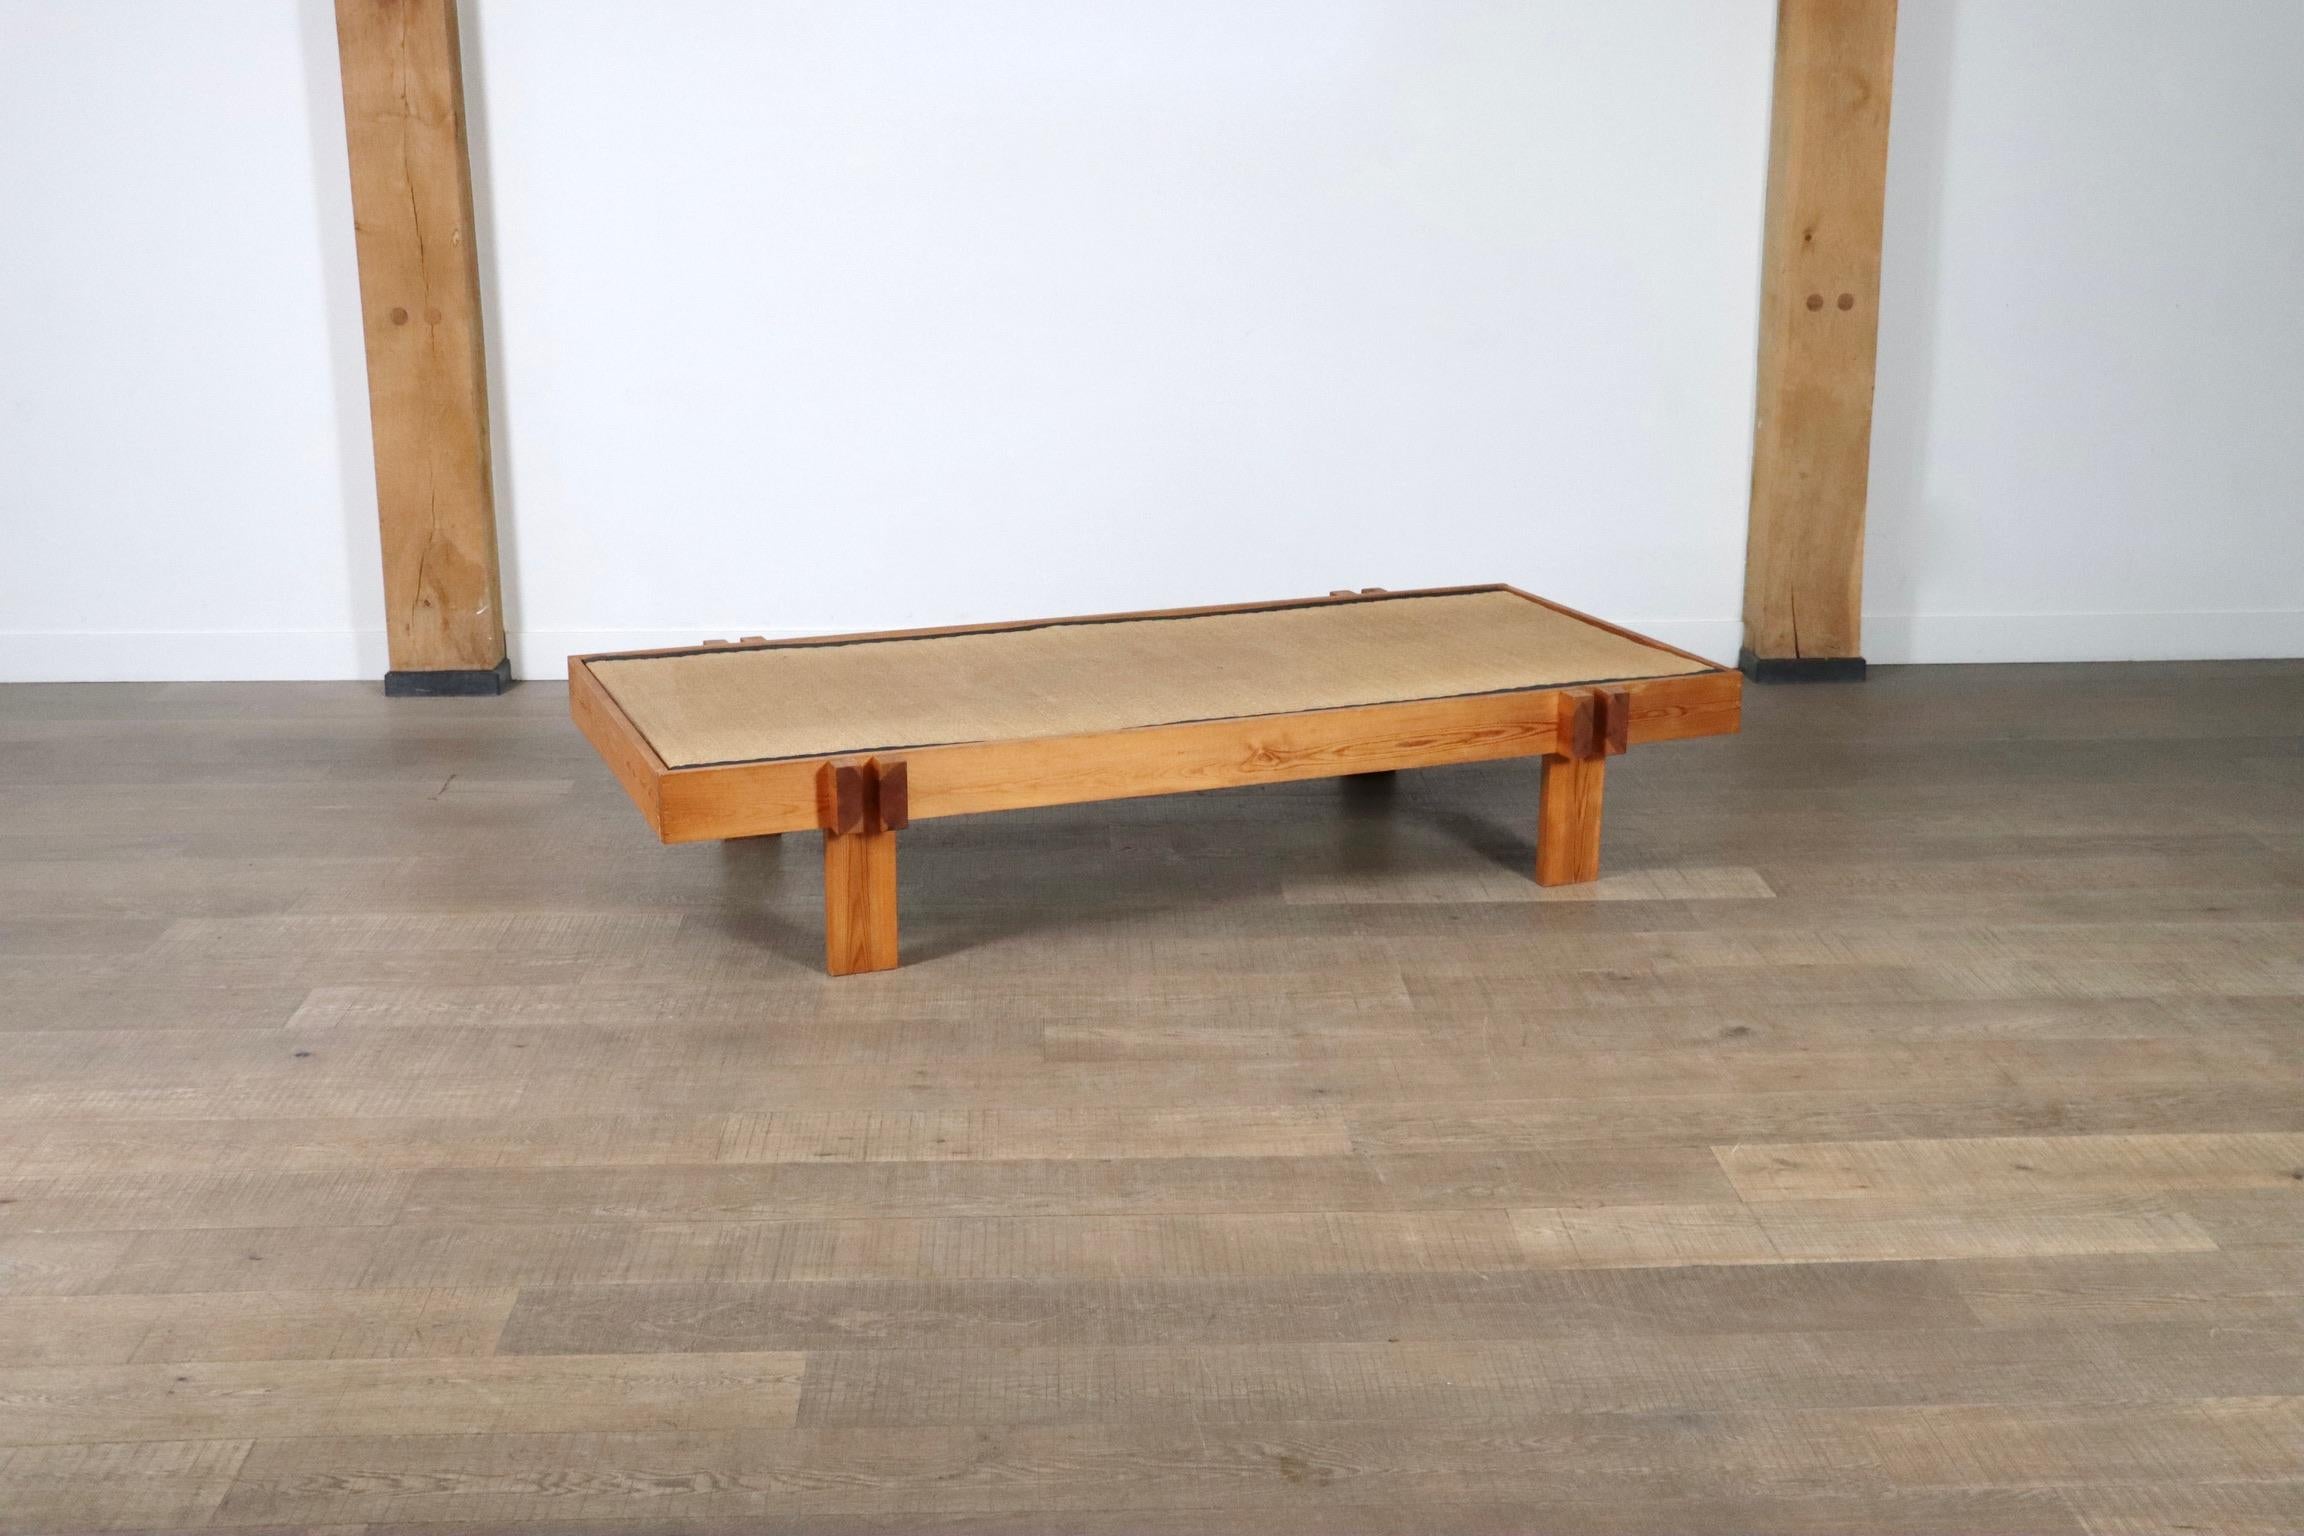 Midcentury Japanese Coffee Table In Wood And Seagrass, Japan, 1960s For Sale 6